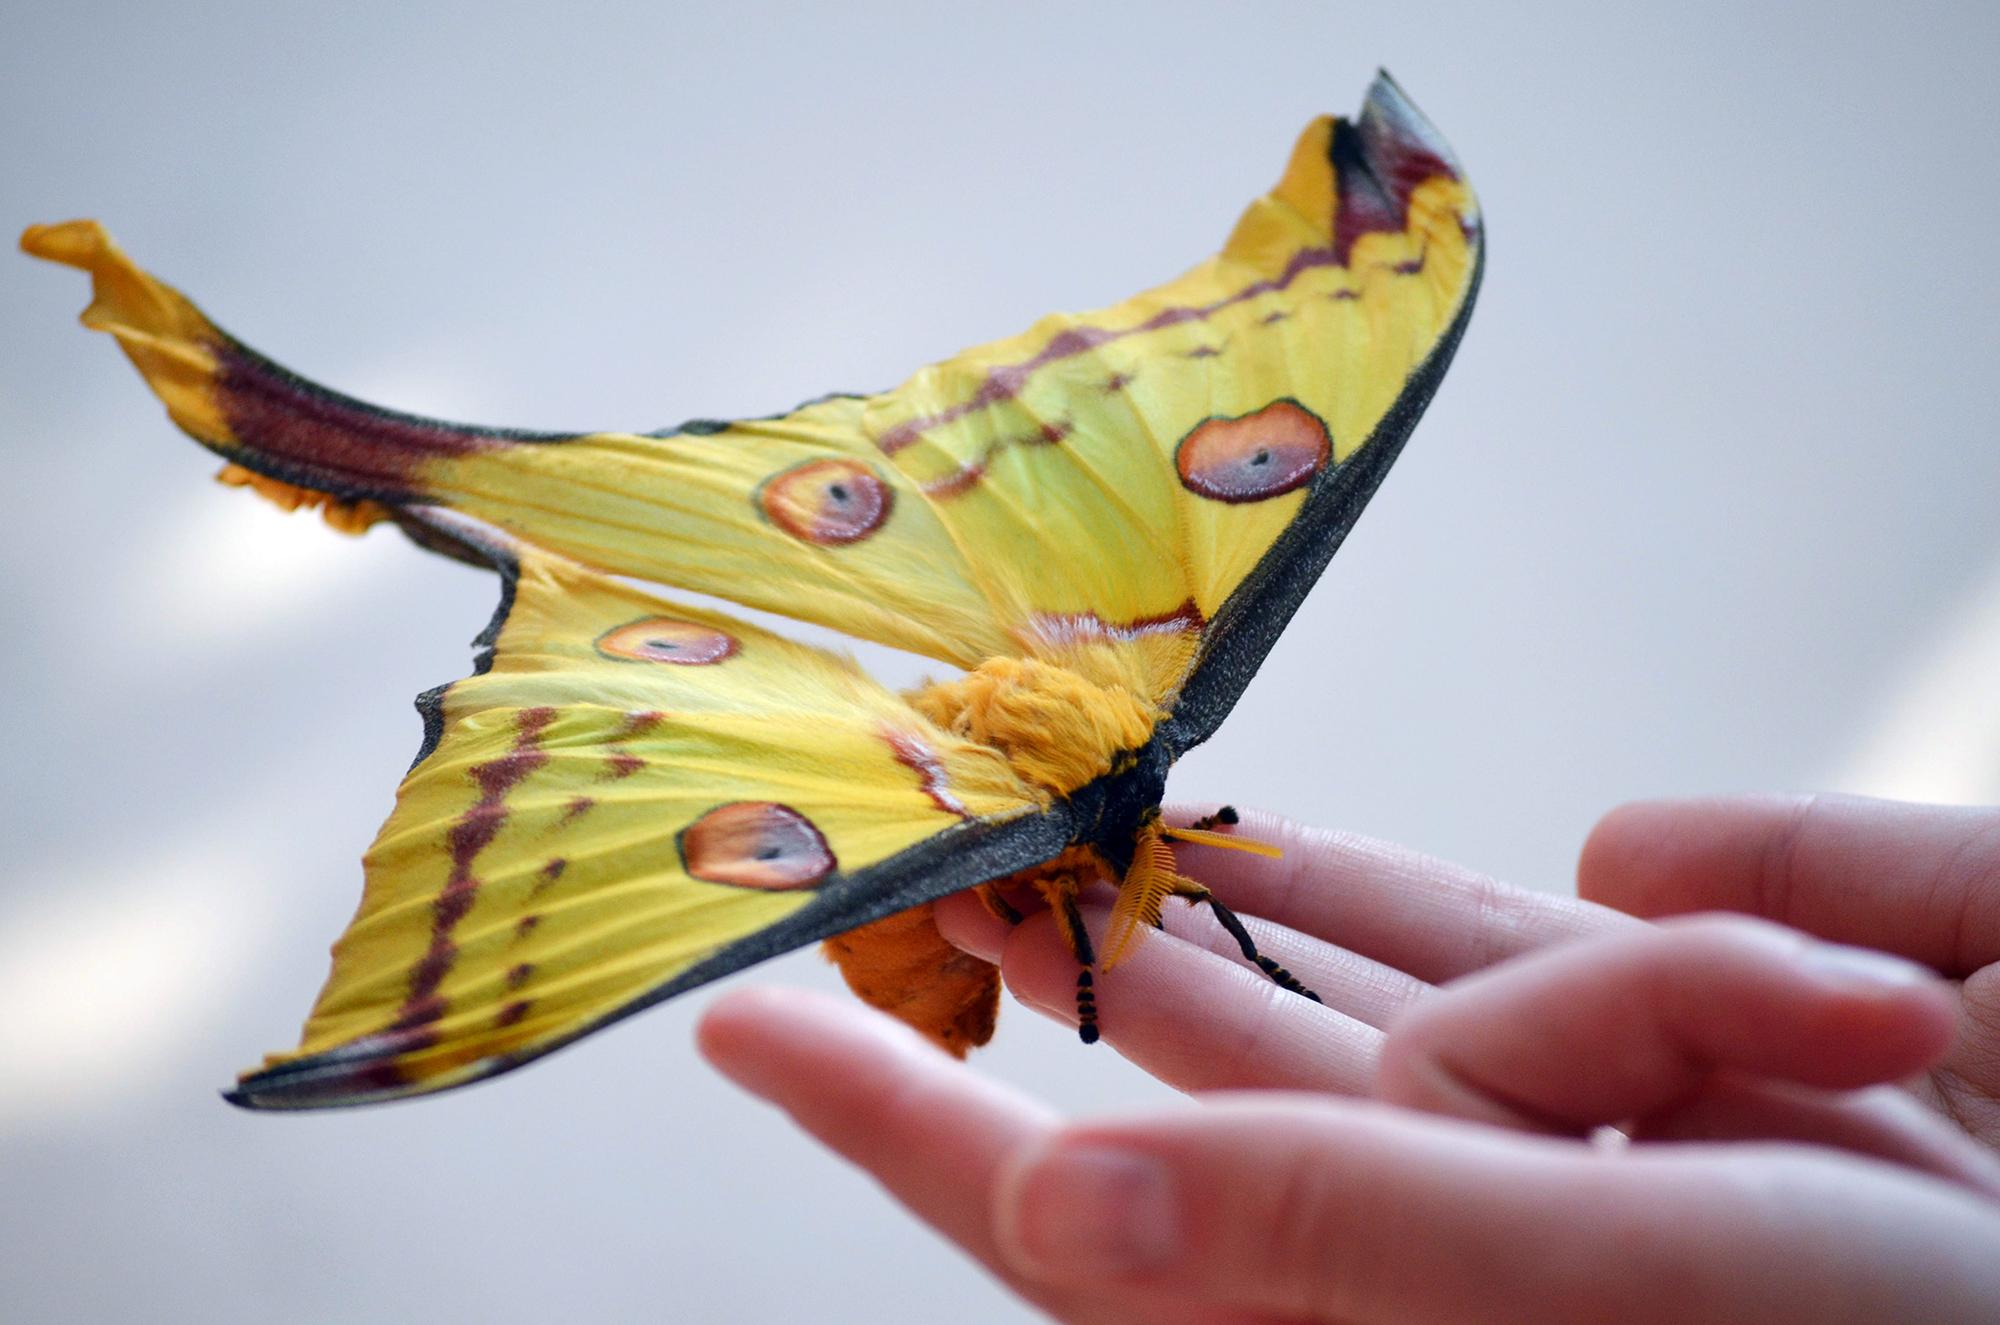 A rare comet moth, also known as a Madagascan moon moth, emerged from its cocoon last week at the Peggy Notebaert Nature Museum. (Courtesy Peggy Notebaert Nature Museum)